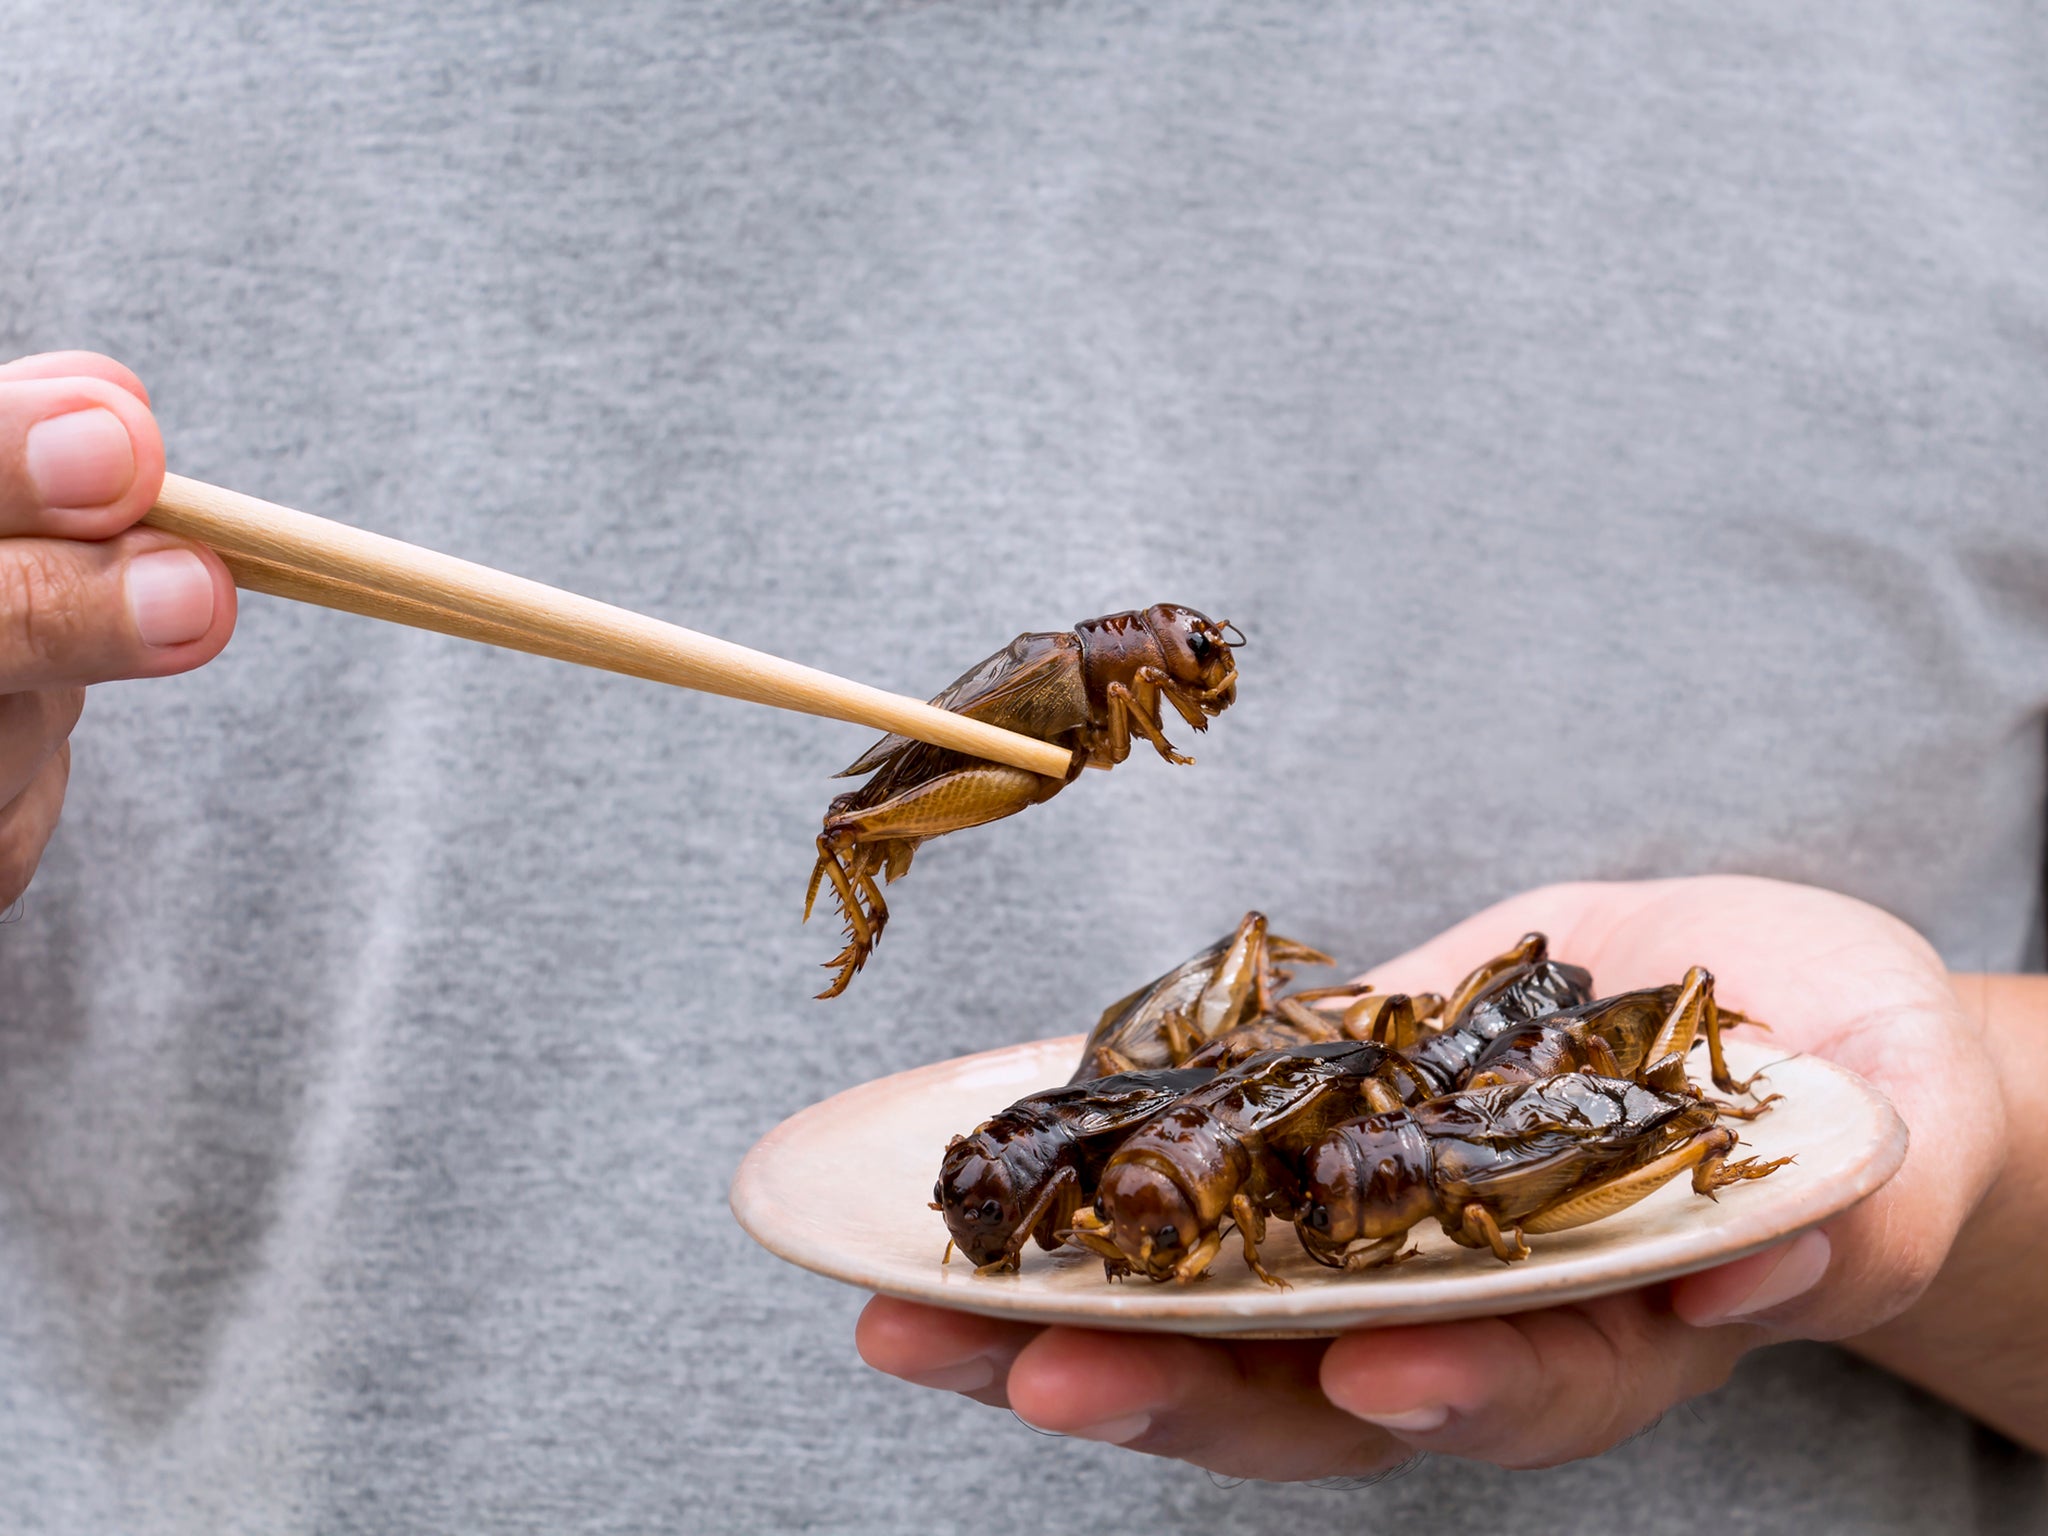 Crickets and other critters have been eaten around the world for thousands of years